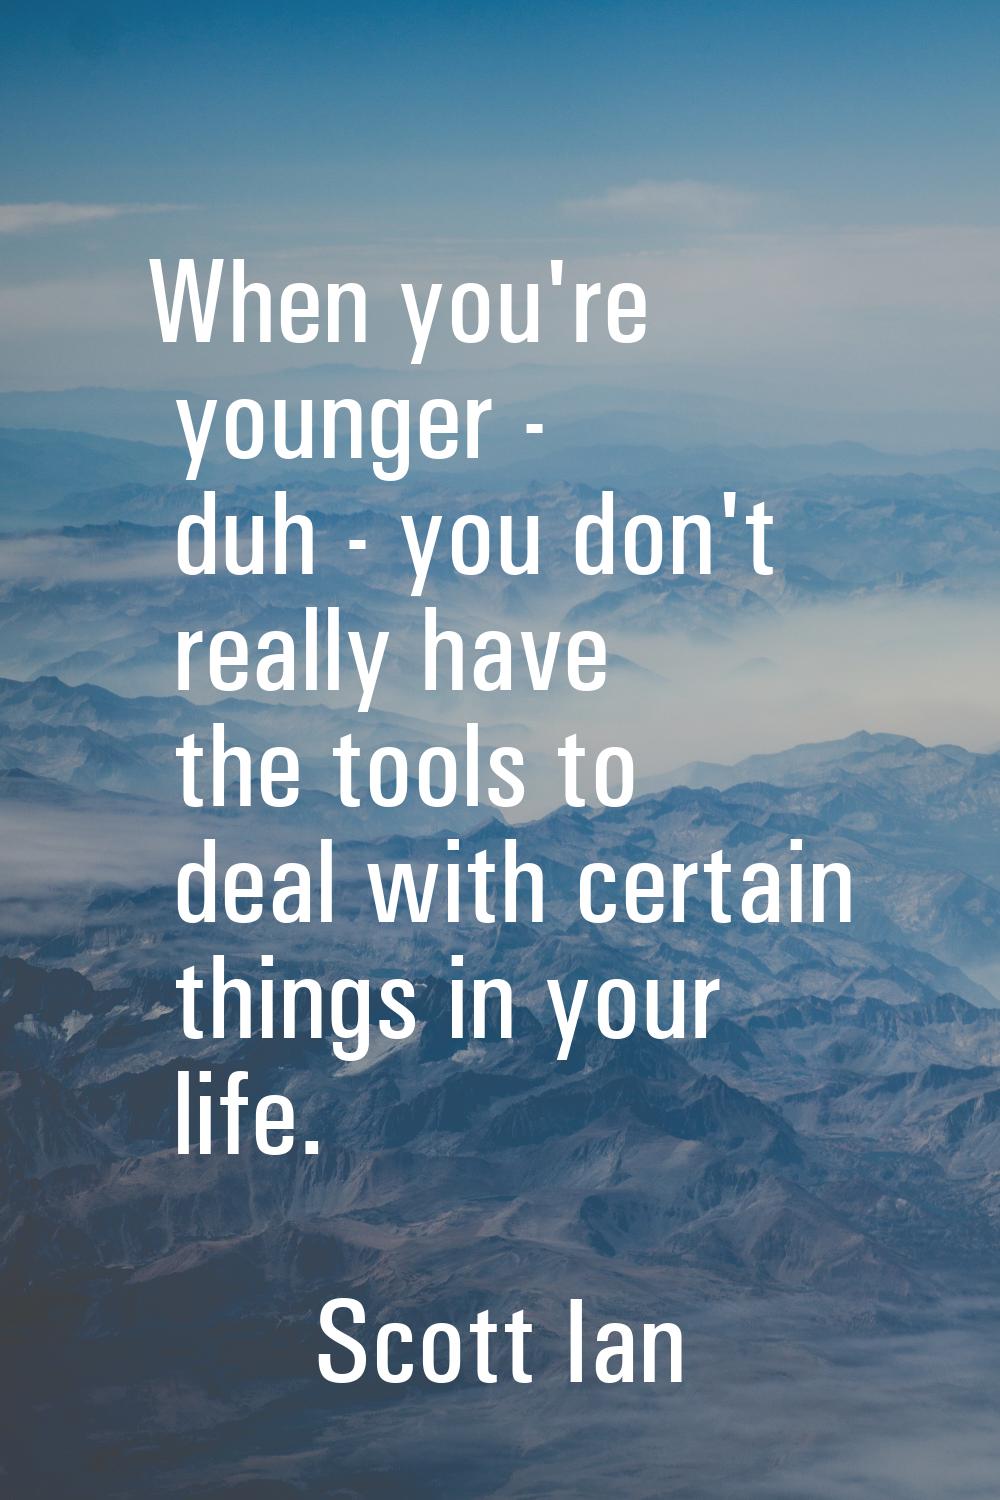 When you're younger - duh - you don't really have the tools to deal with certain things in your lif